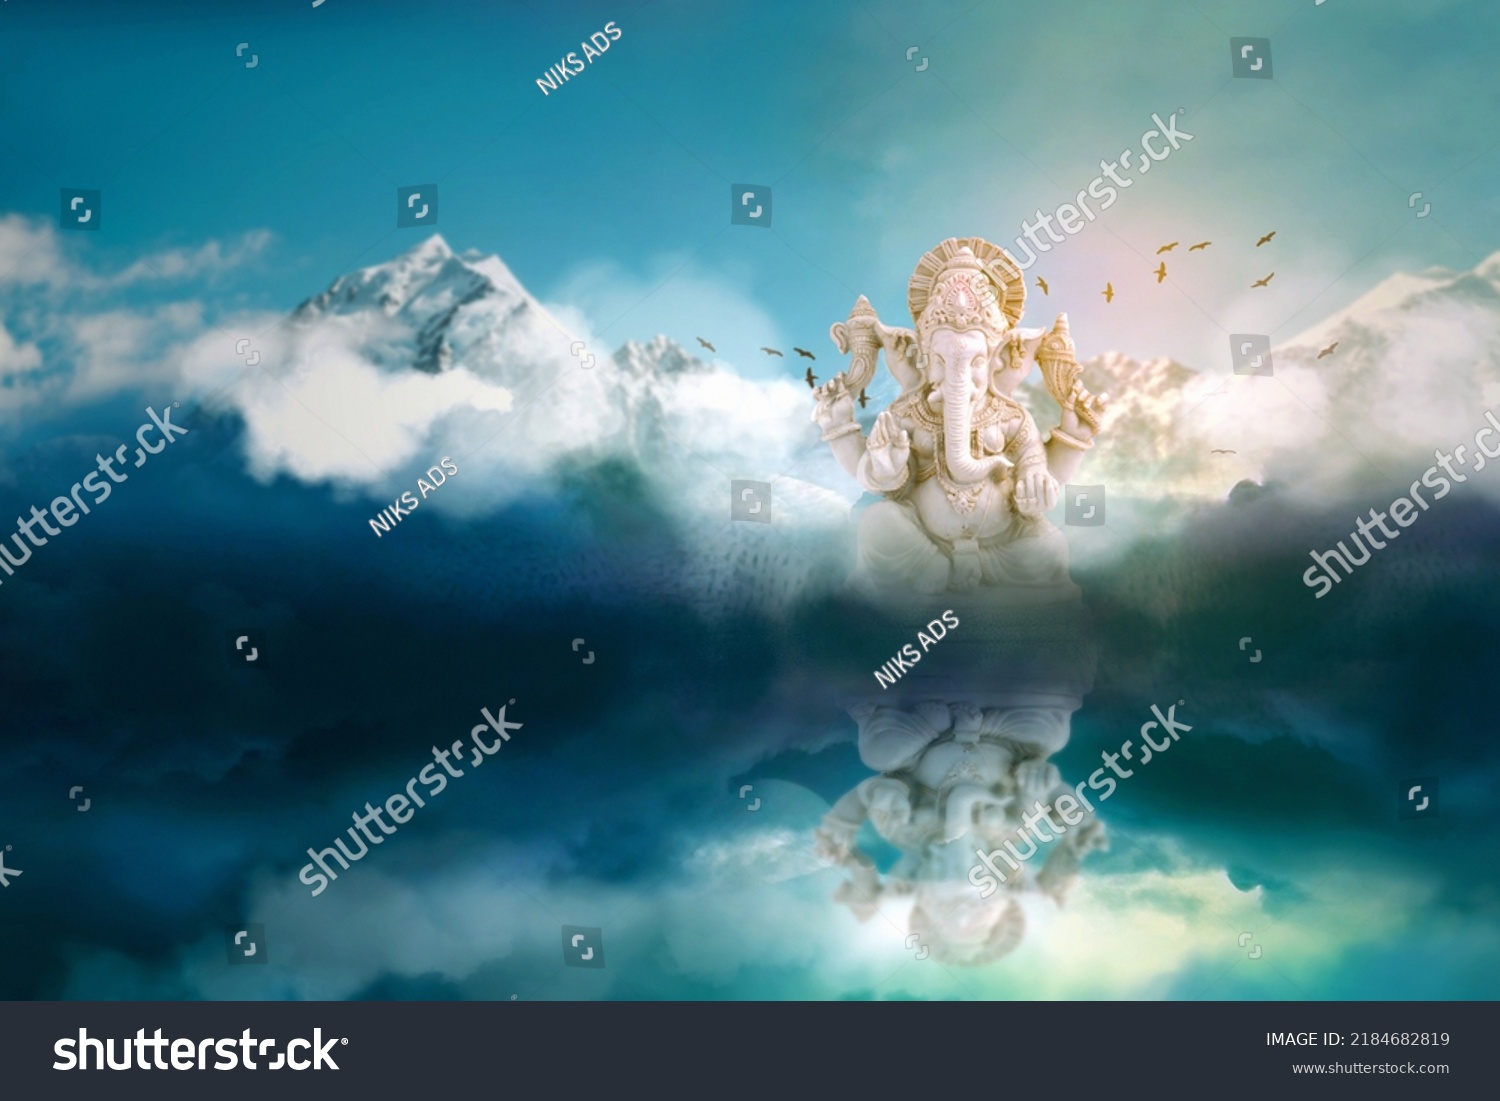 Lord ganesha sculpture on mountain and sky background. #2184682819